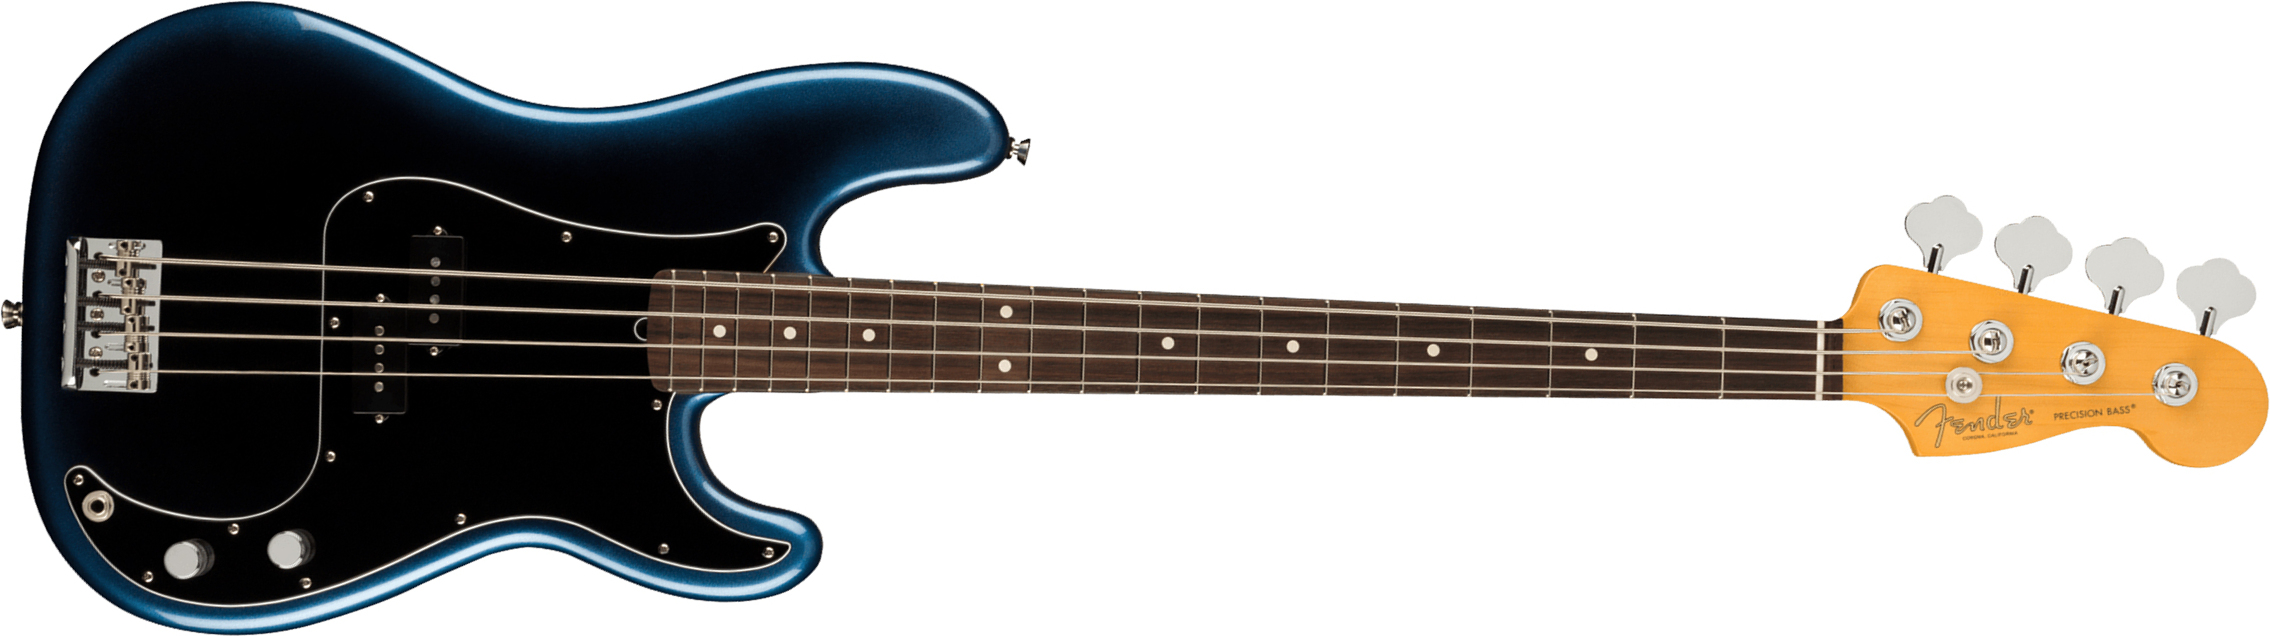 Fender Precision Bass American Professional Ii Usa Rw - Dark Night - Basse Électrique Solid Body - Main picture